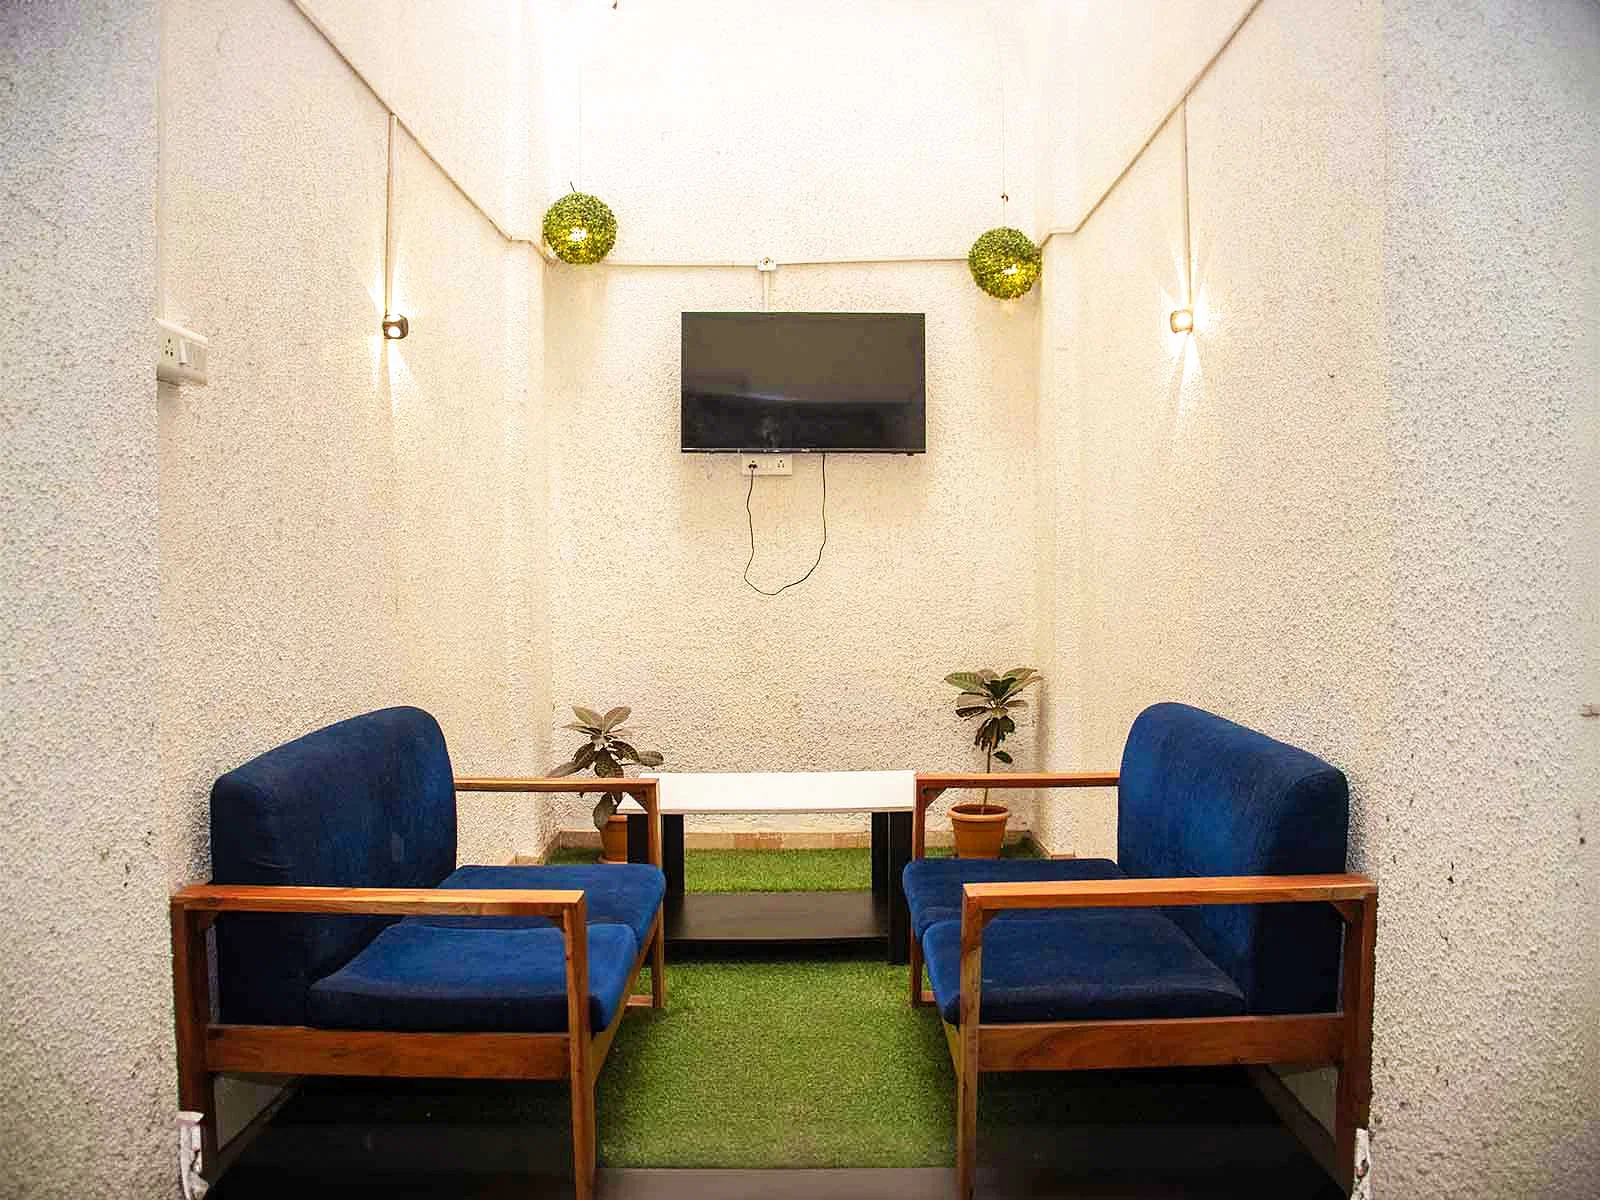 Affordable single rooms for students and working professionals in Pimple Nilakh-Pune-Zolo Halberd